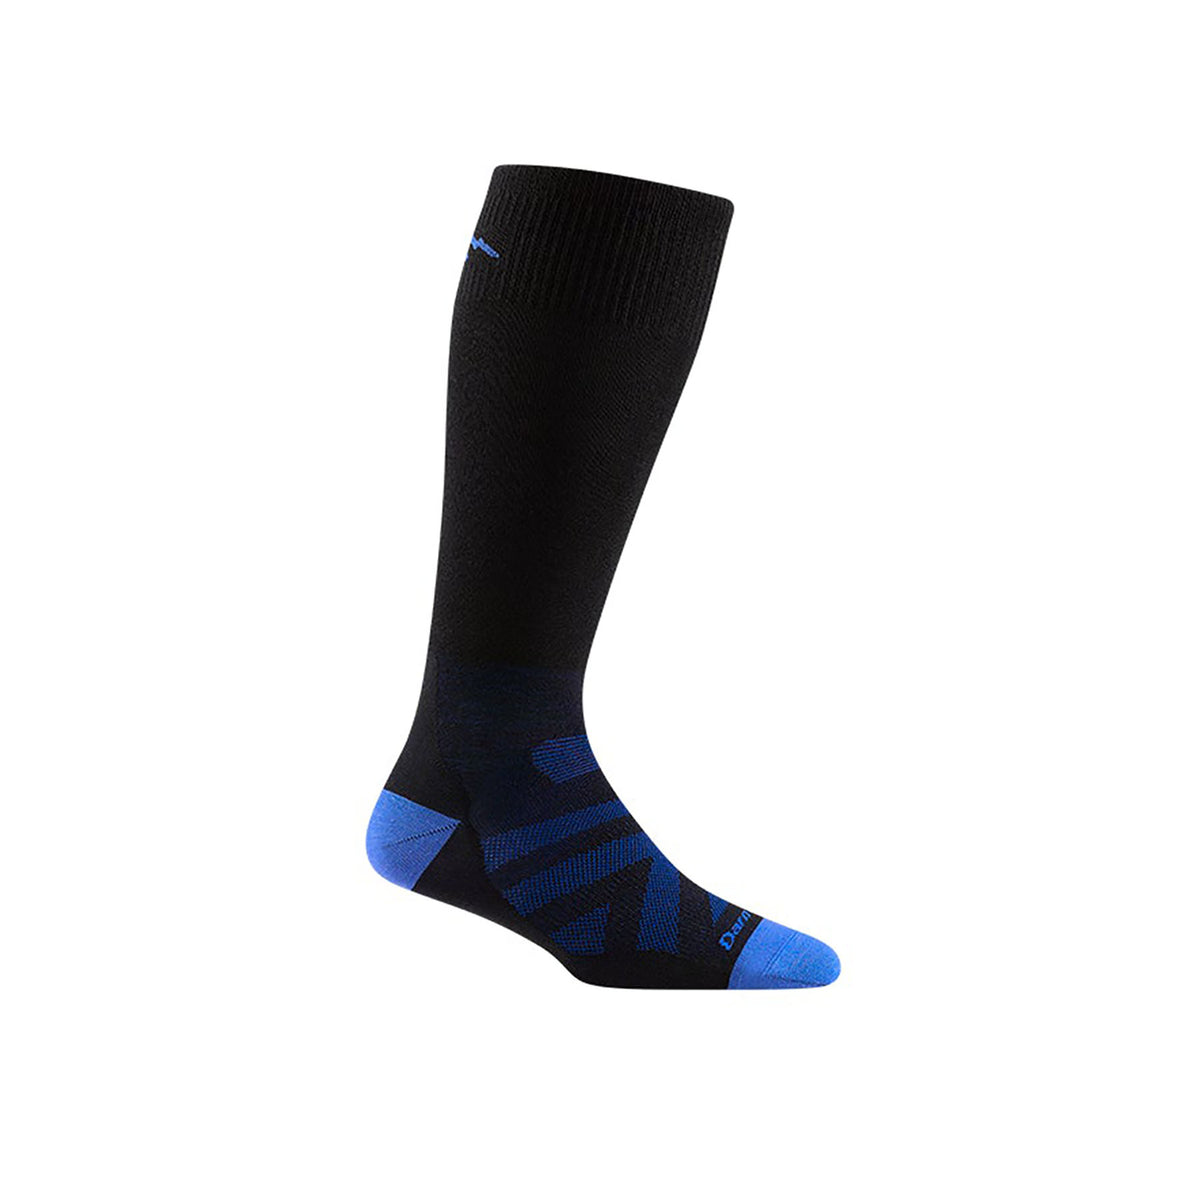 Hero image of the Kids RFL Jr. OTC sock with the the sock posed with a lifted heel and on the balls of  the foot